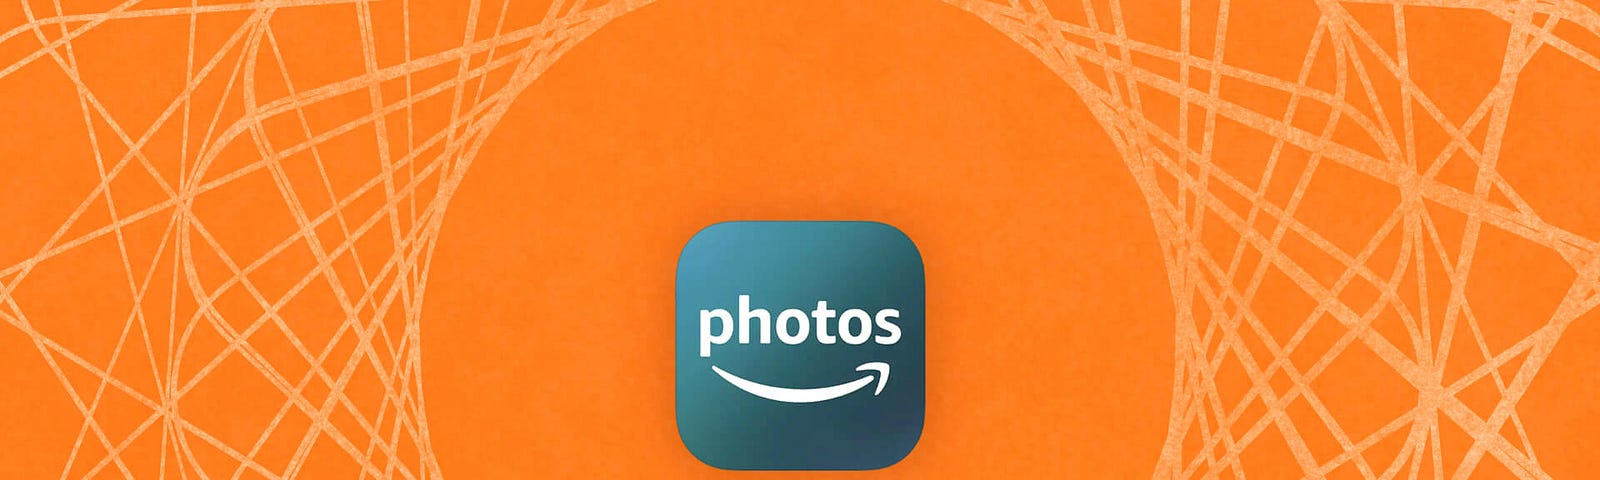 An illustration of the Amazon Photos iOS app icon surrounded by a spiderweb on a textured orange background.